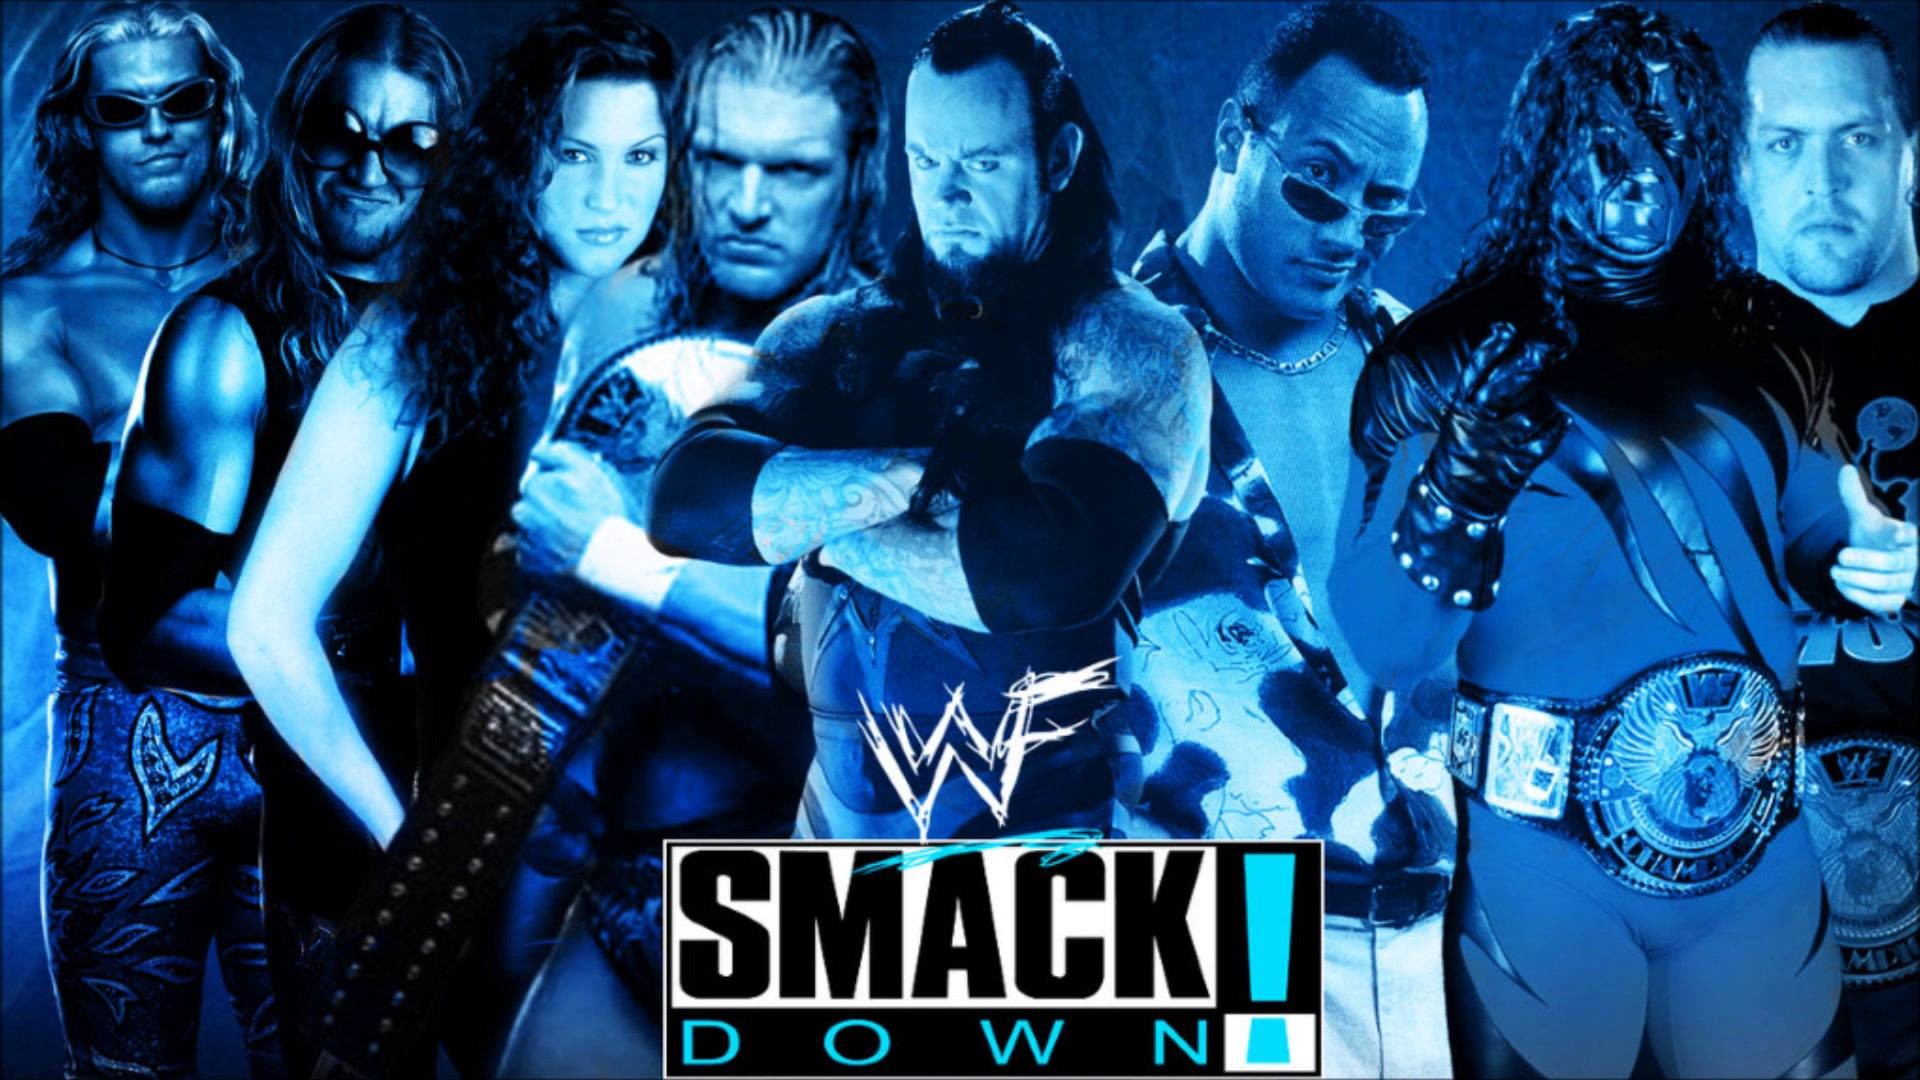 Let’s Play WWF SmackDown!